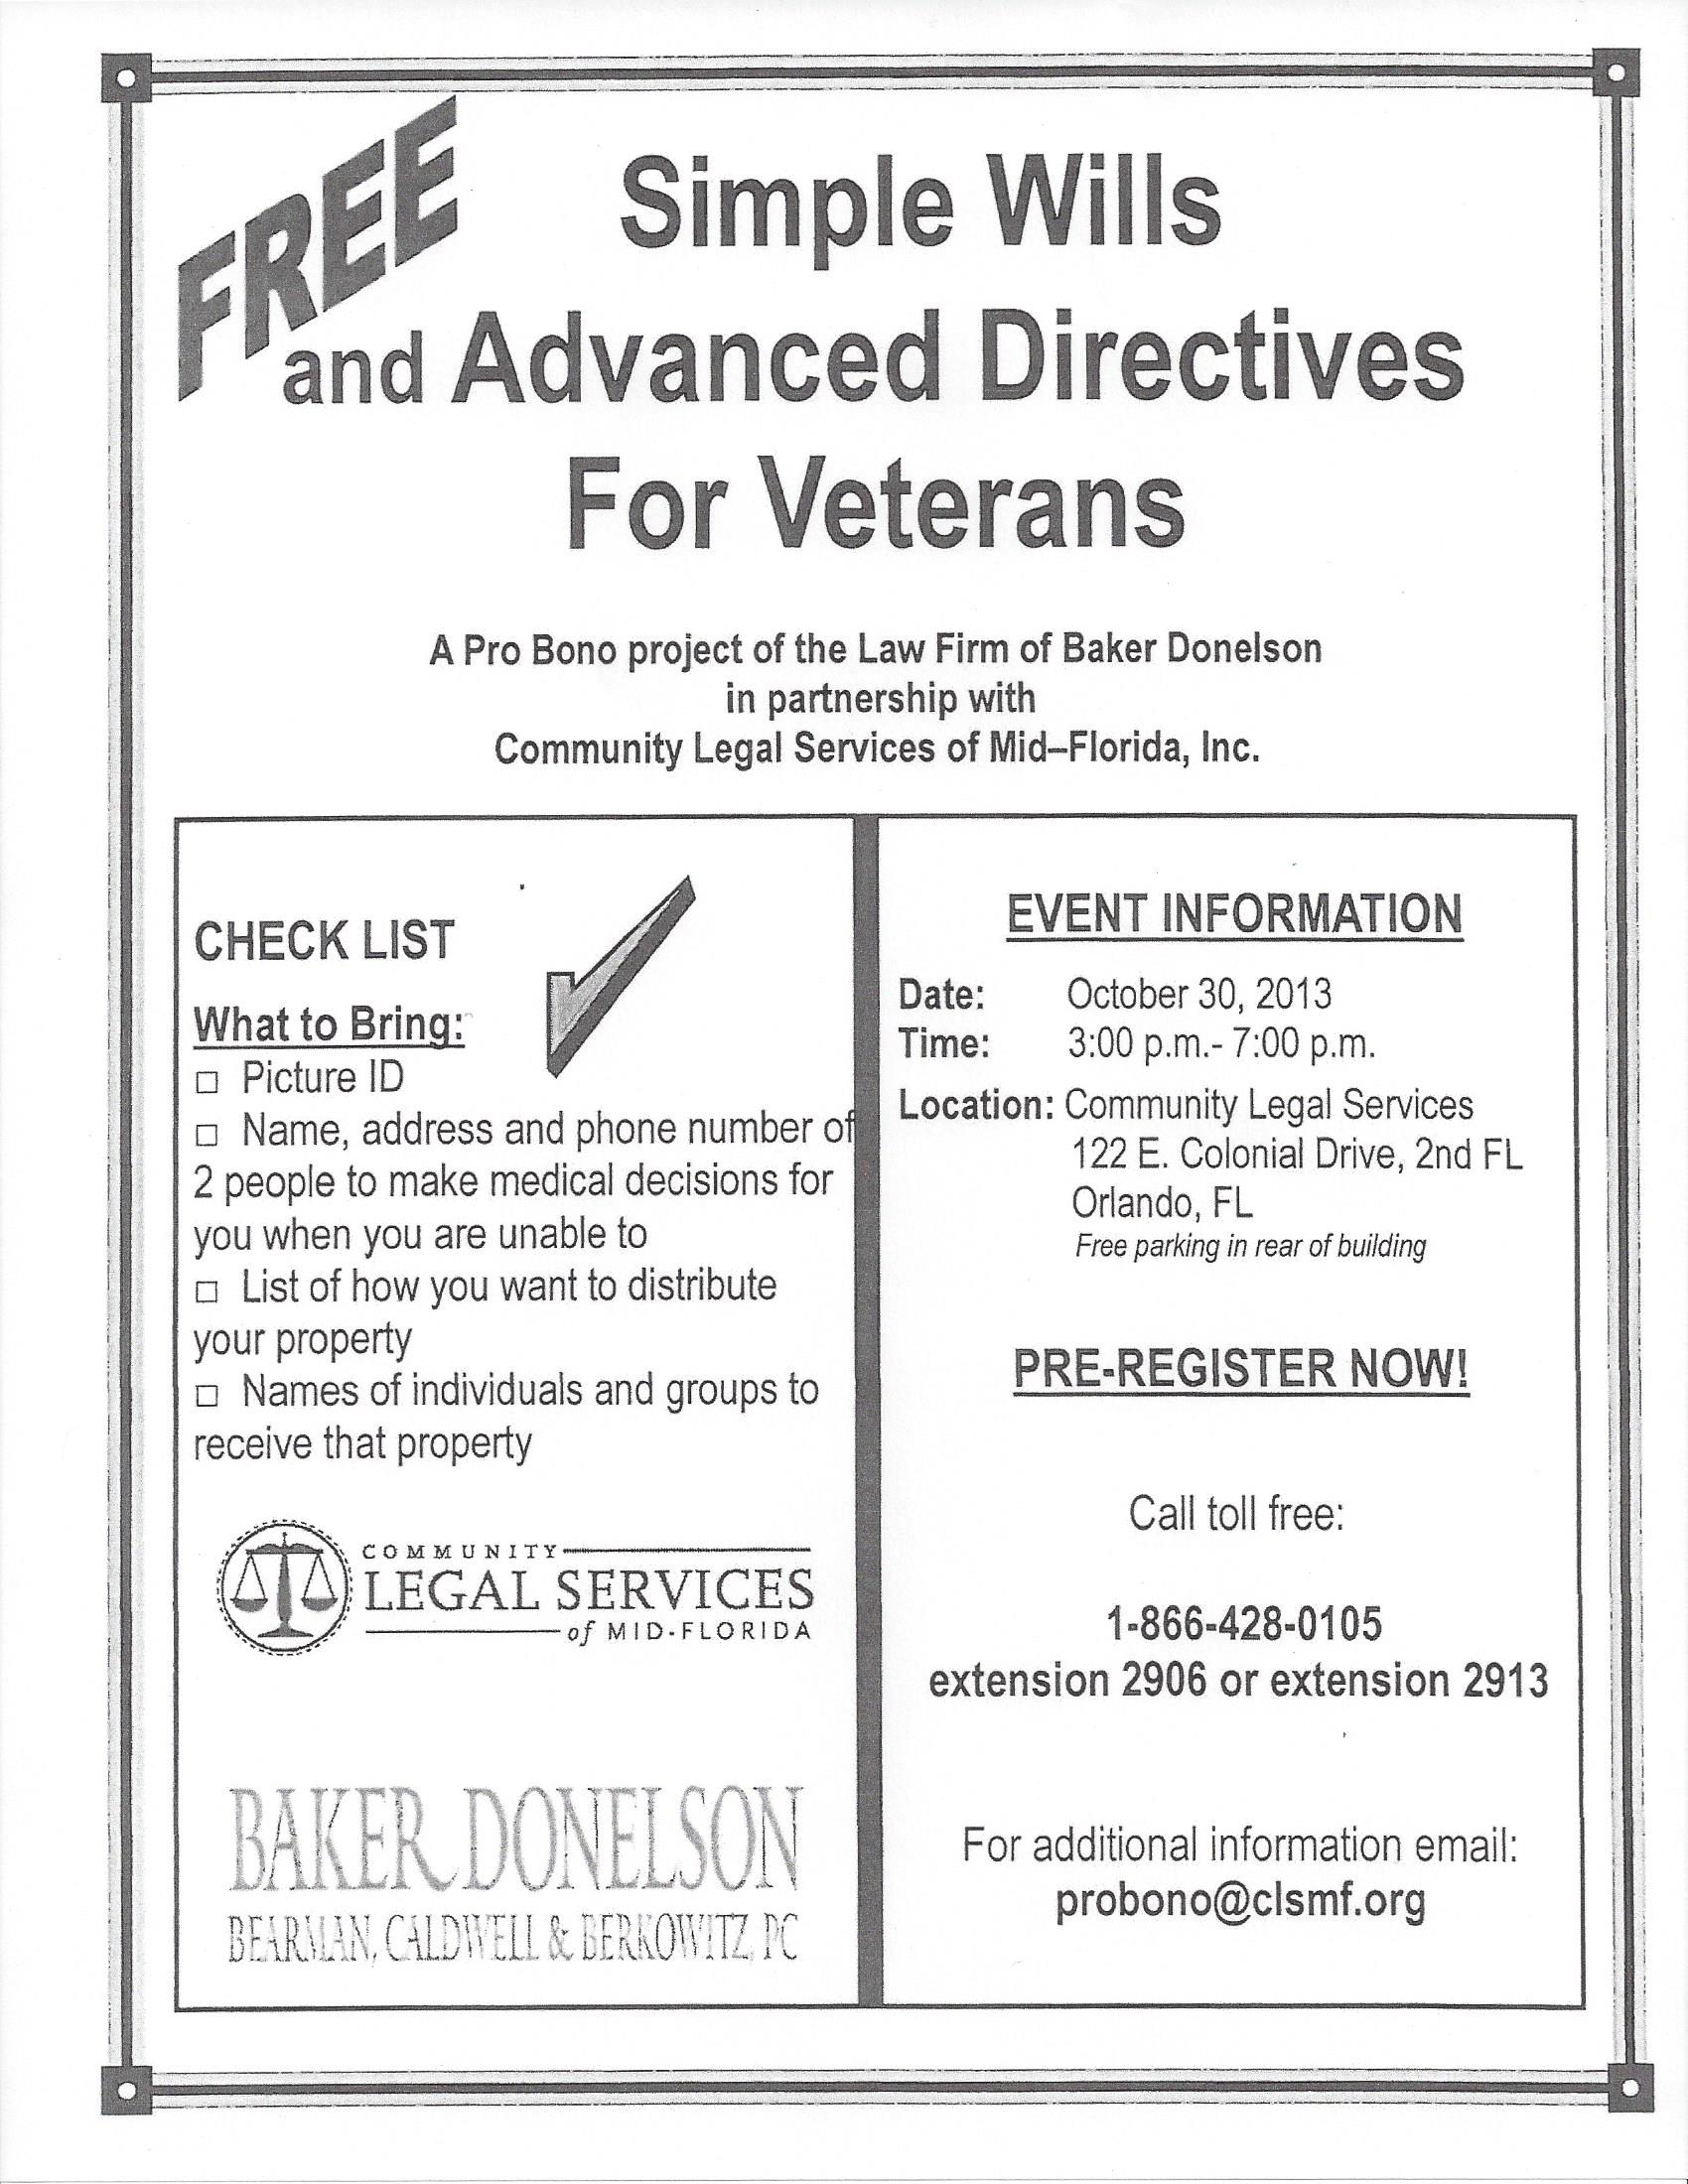 FREE Simple Will For Veterans | Debary Florida VFW Post 8093